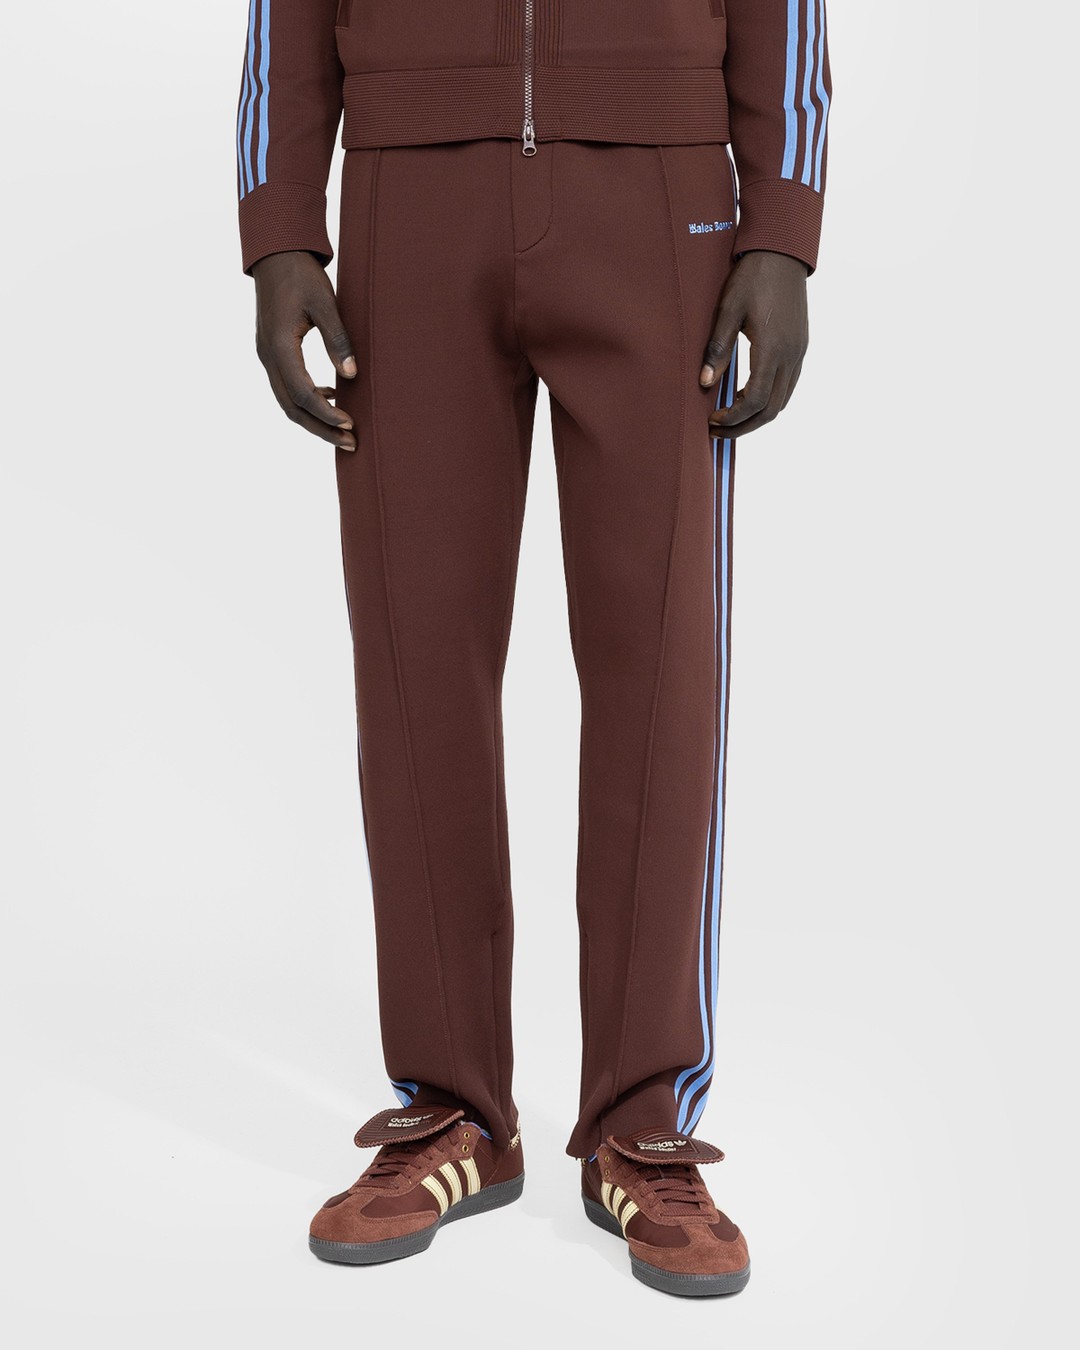 Adidas x Wales Bonner – Knit Track Pant Mystery Brown - Pants - Brown - Image 2